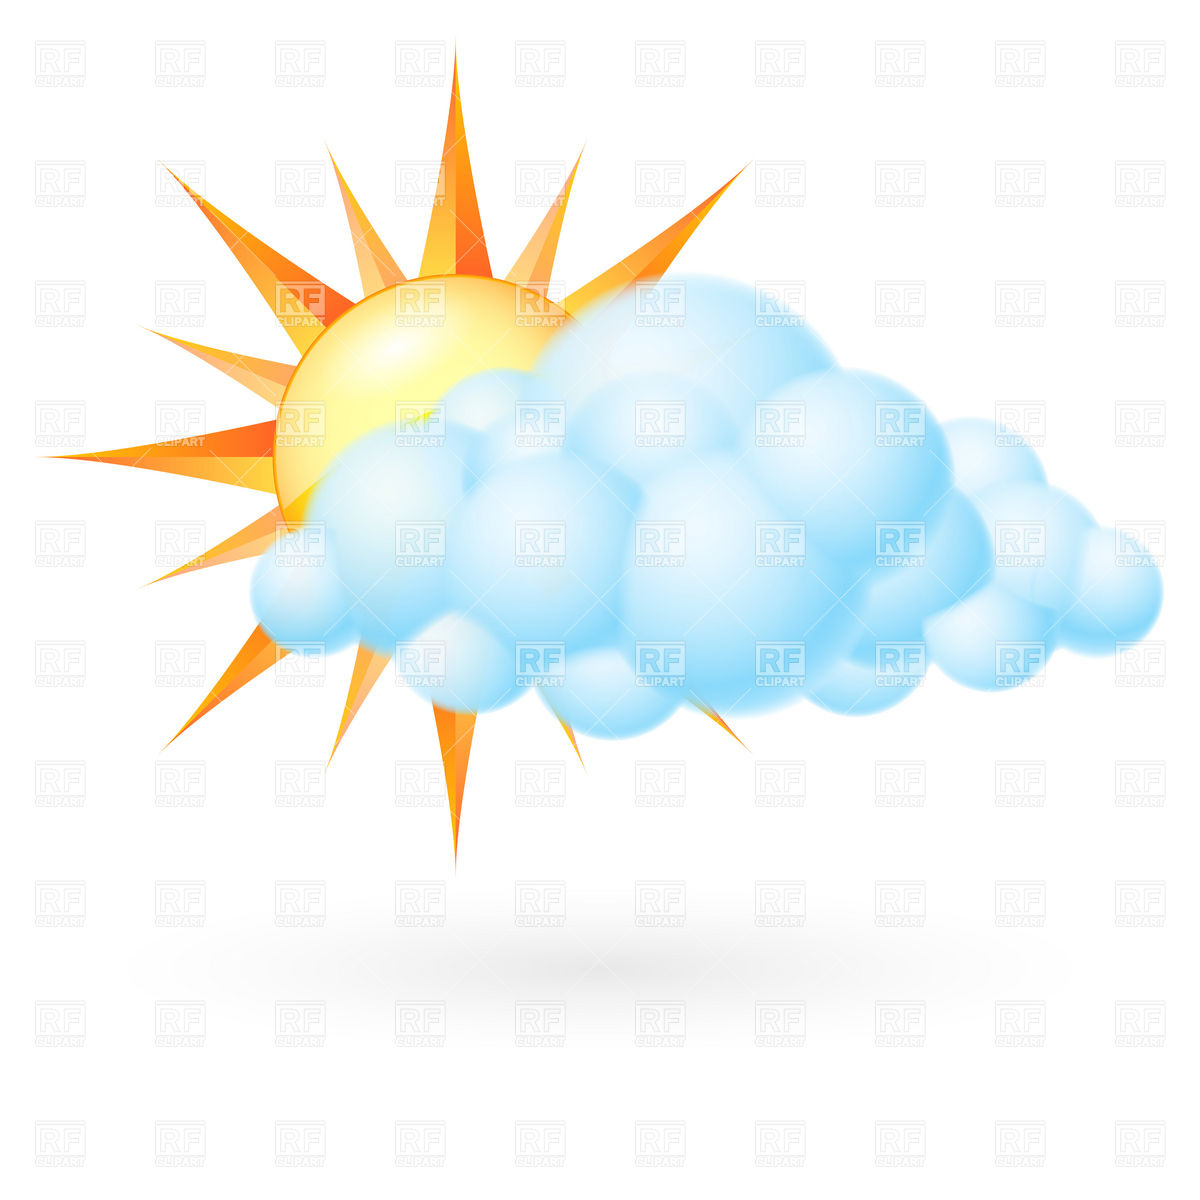     Cloudy Weather Icon 9177 Download Royalty Free Vector Clipart  Eps